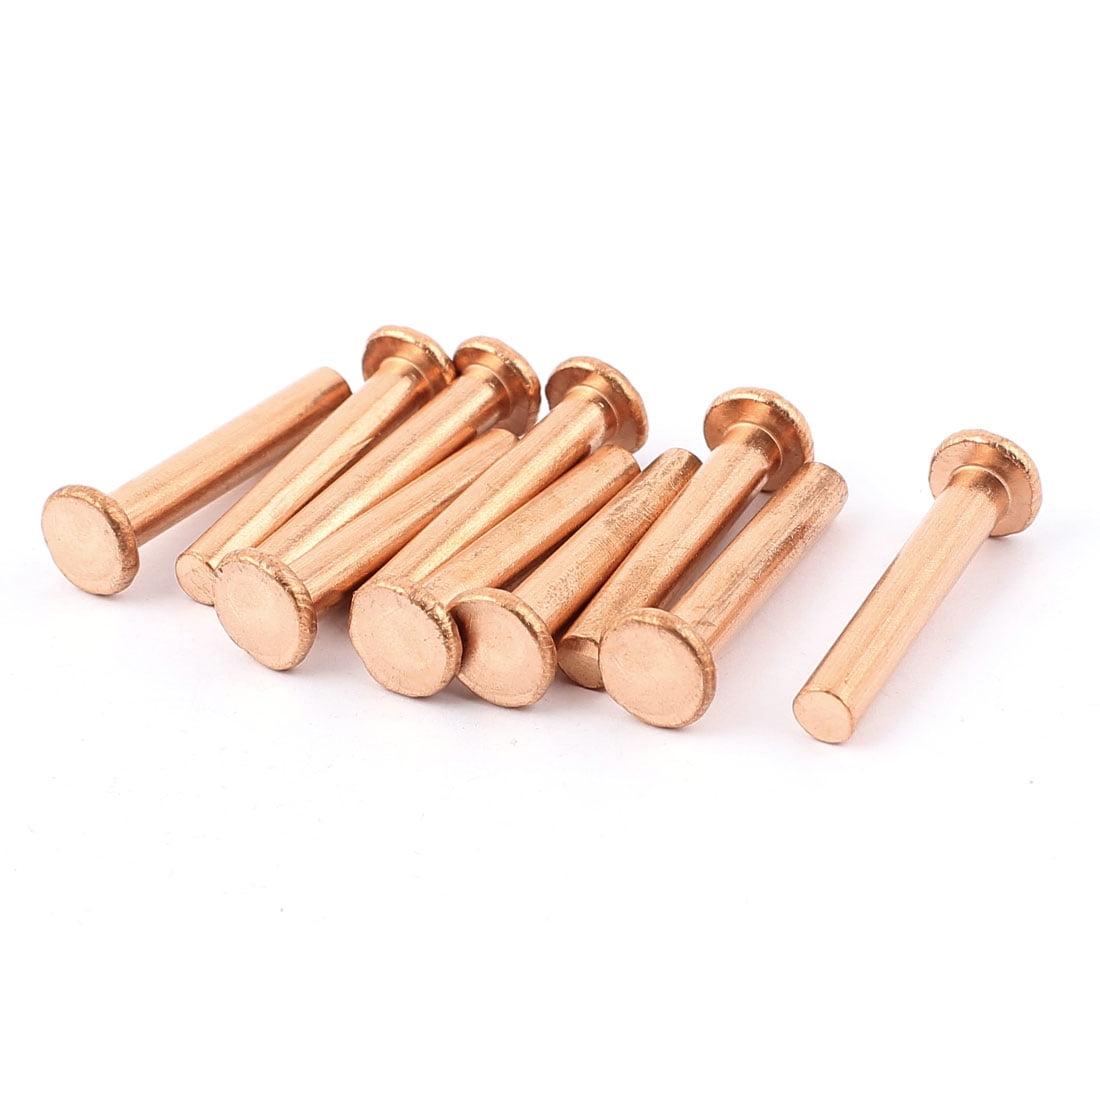 15/64 Inch x 1 3/8 Inch Flat Head Copper Solid Rivets Fasteners Pack of 10 